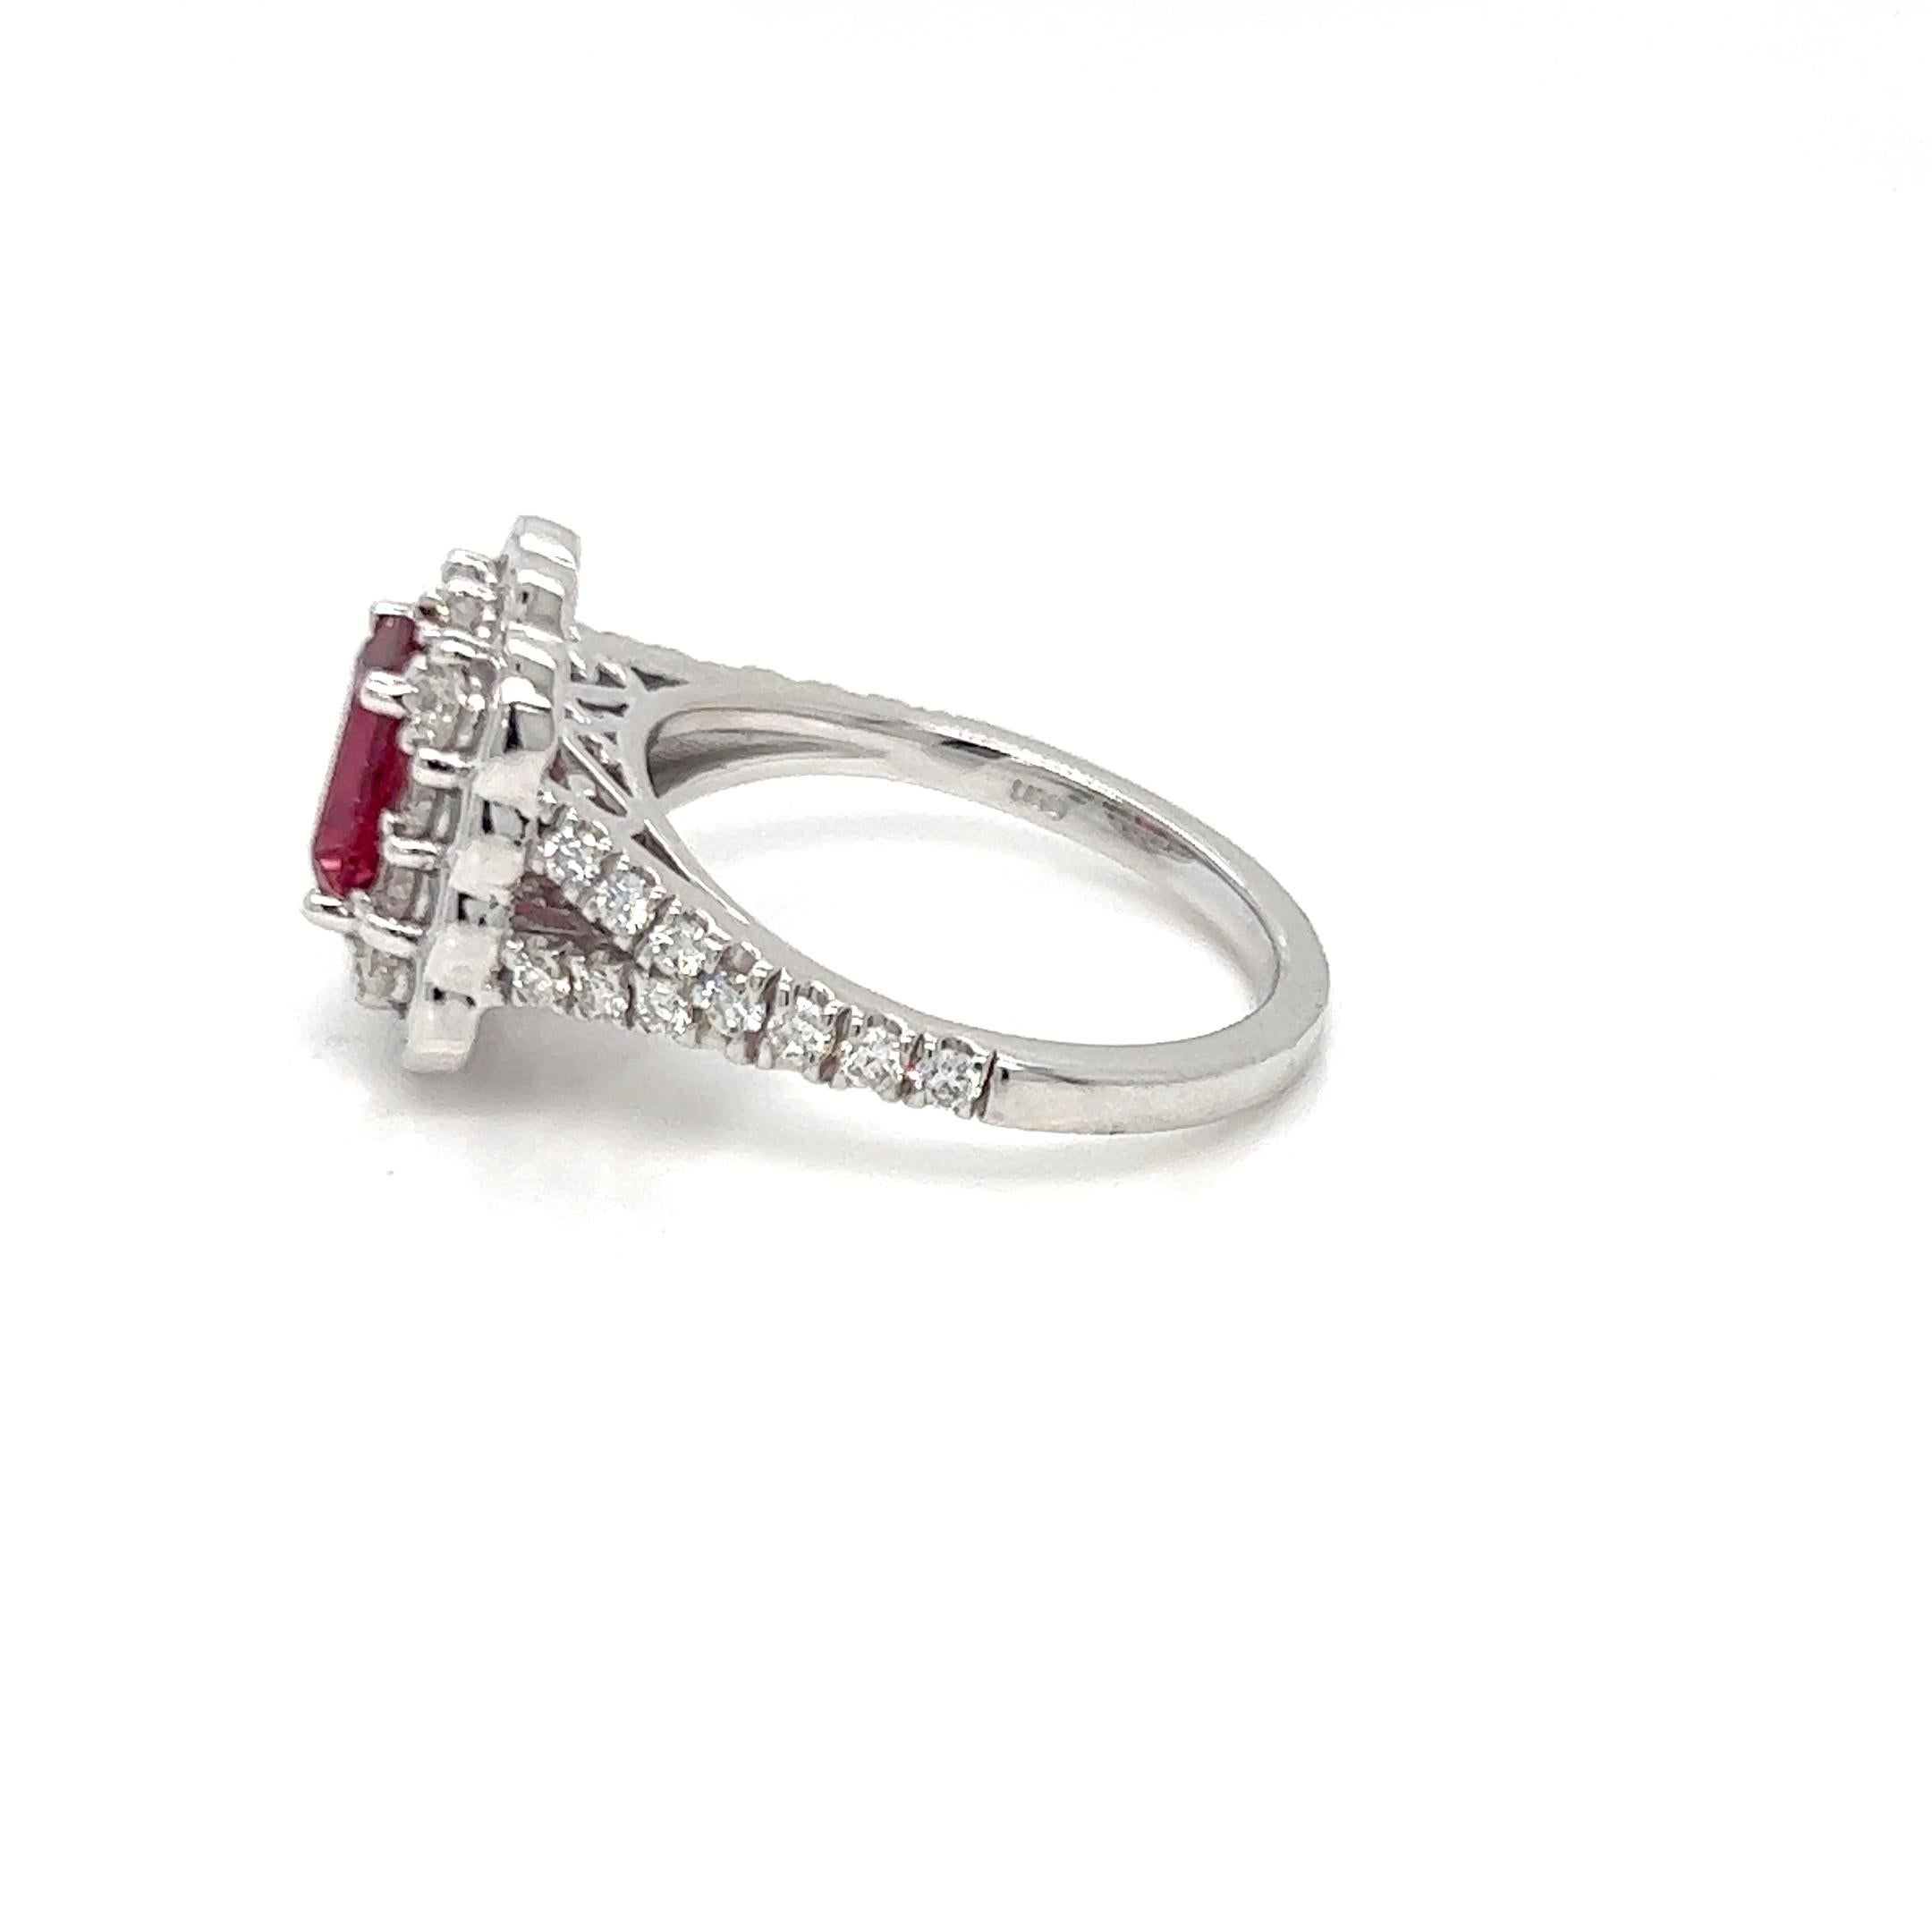 Presenting our magnificent 1.88 Carat Emerald Cut Ruby Diamond Halo Engagement Ring, which showcases a magnificent Mozambique ruby encircled by a dazzling halo of diamonds. This exquisitely designed ring is a timeless representation of love and